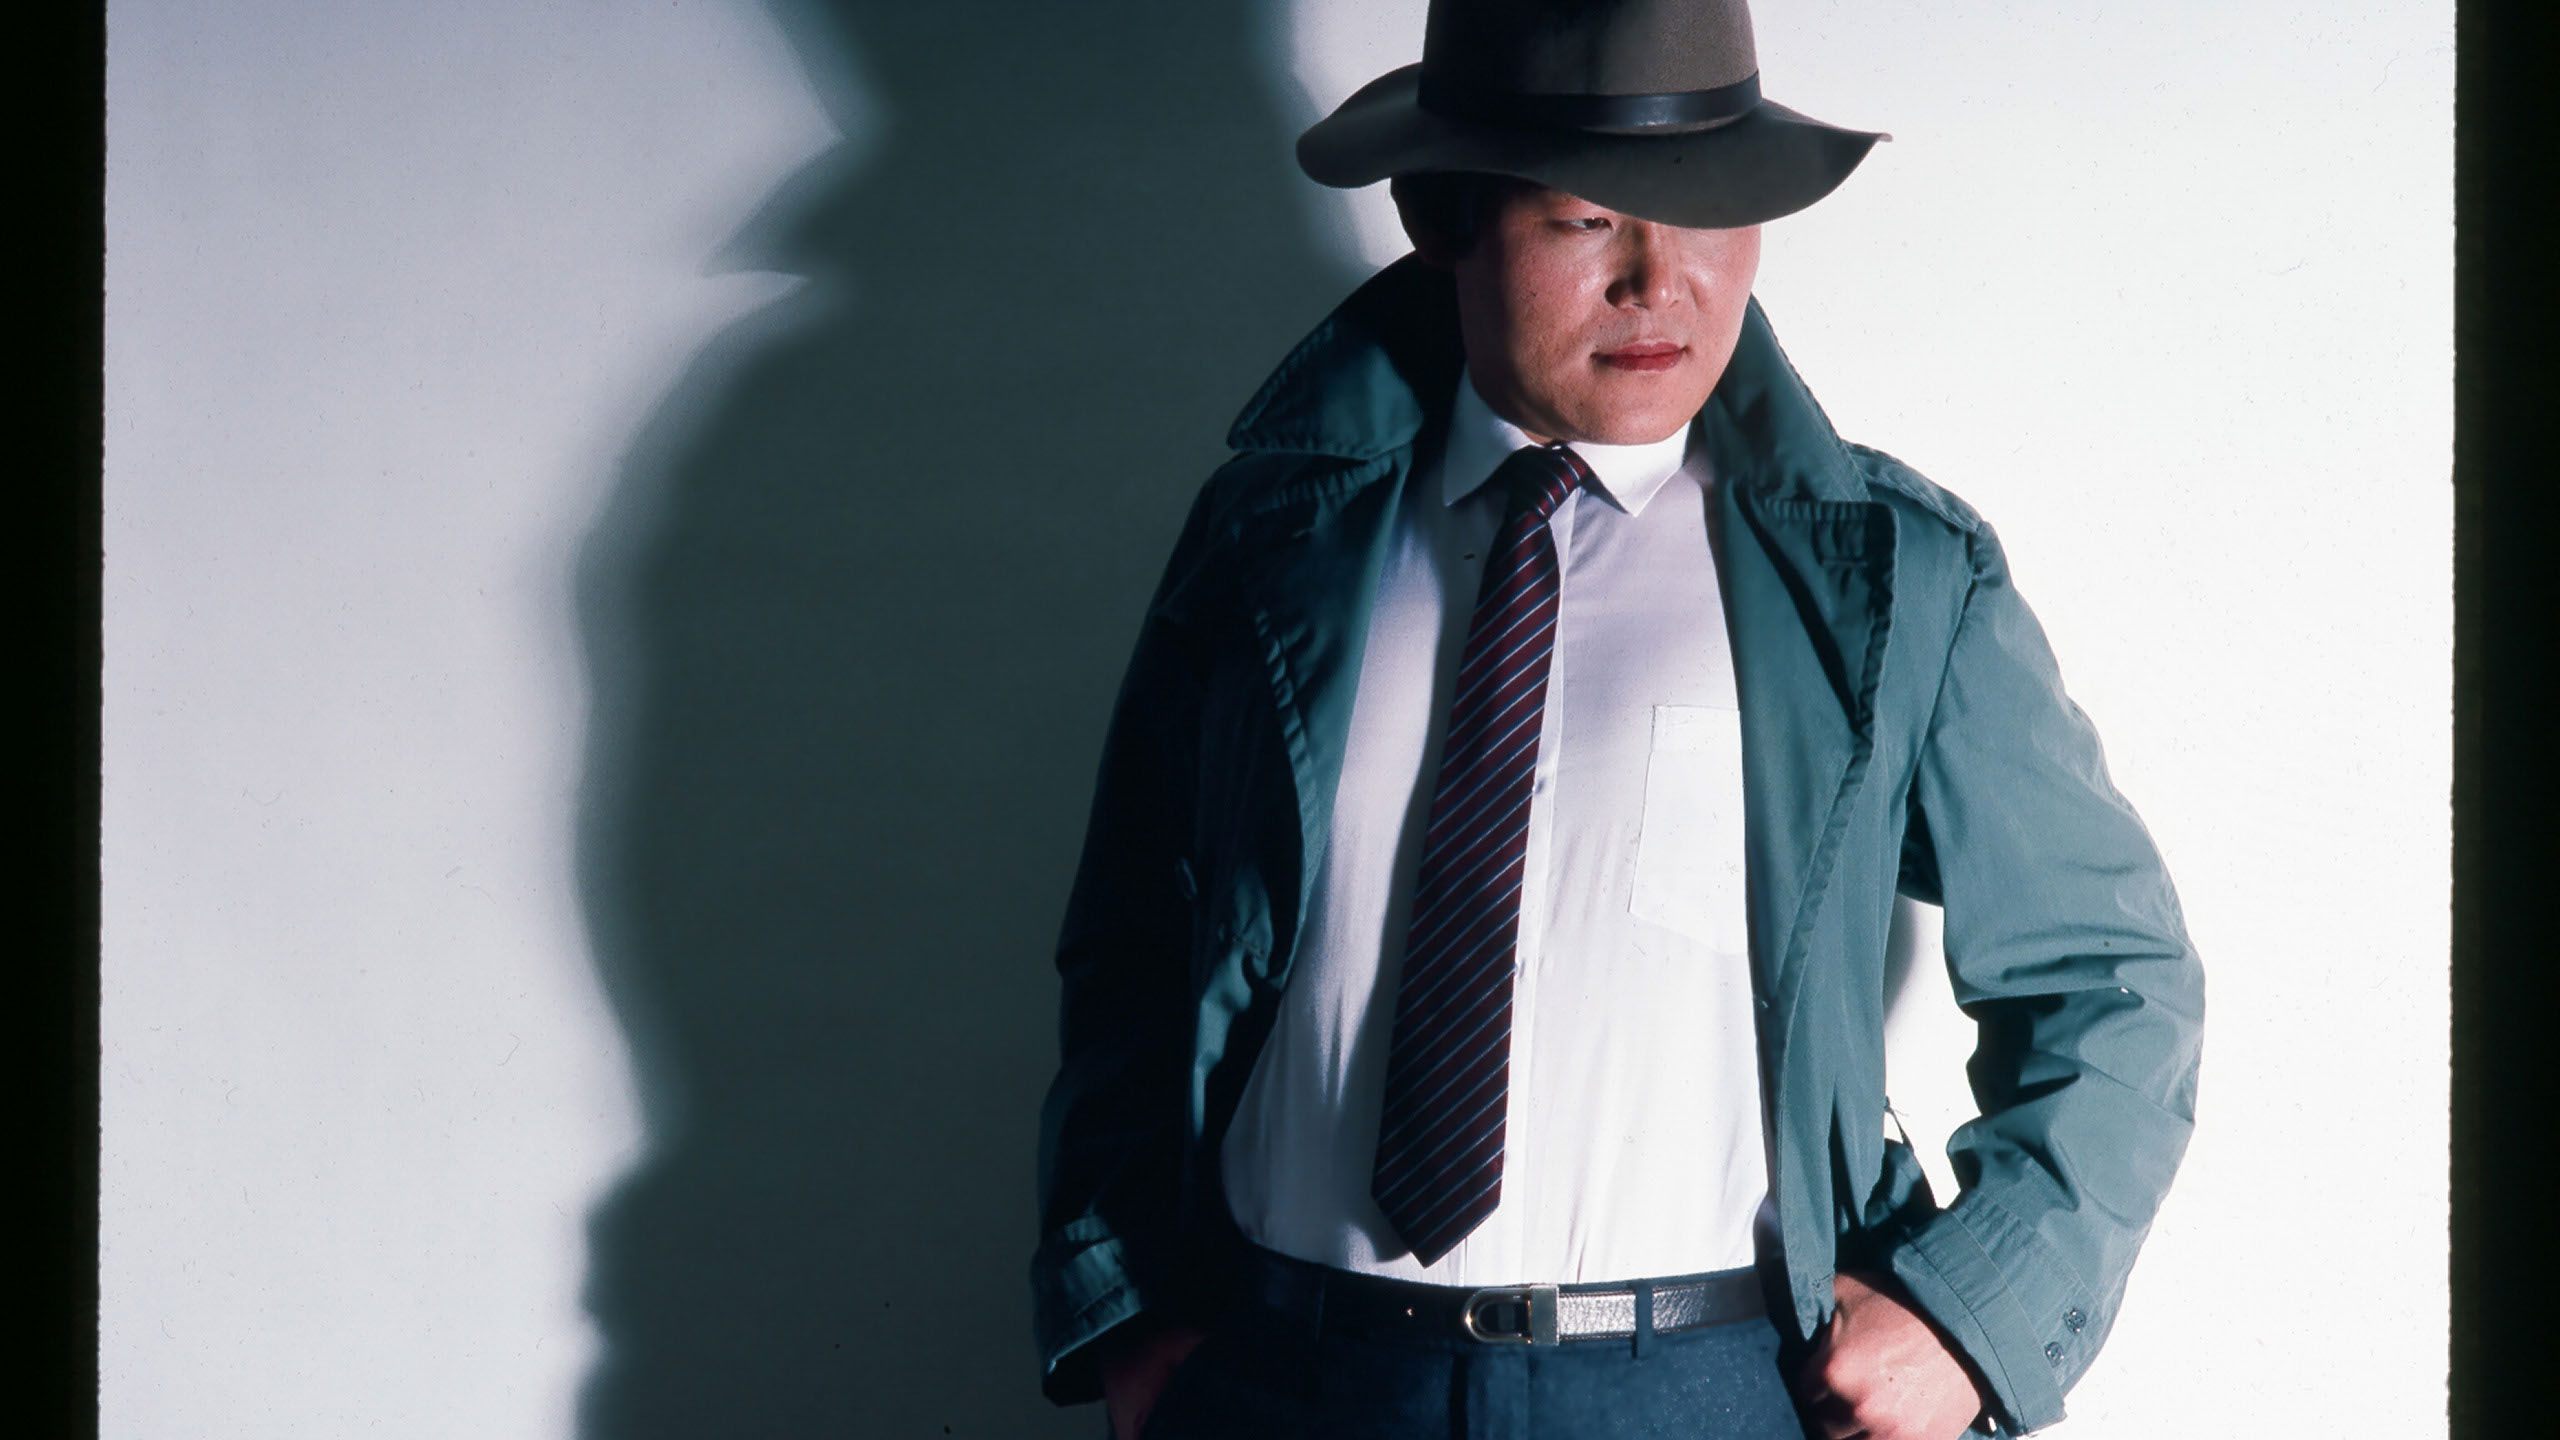 asian man in a jacket and tie with a fedora on looking to the right against a white wall